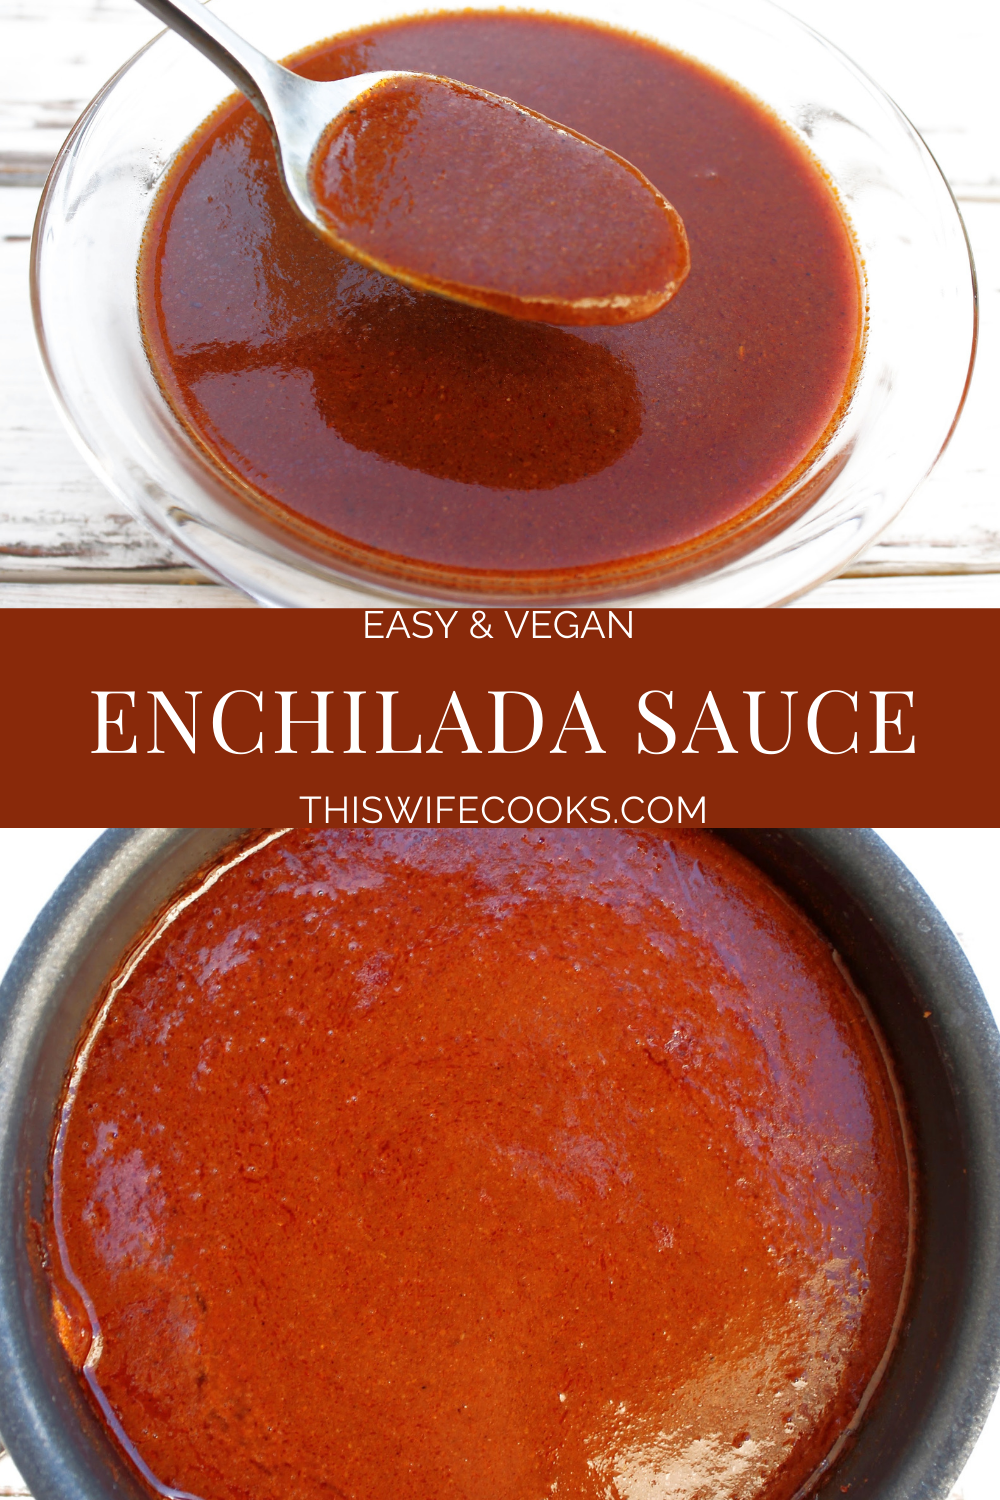 Red Enchilada Sauce ~ A few simple ingredients and about 15 minutes are all you need to whip up a batch of bold-flavored enchilada sauce that will have you ditching the canned stuff for good! via @thiswifecooks